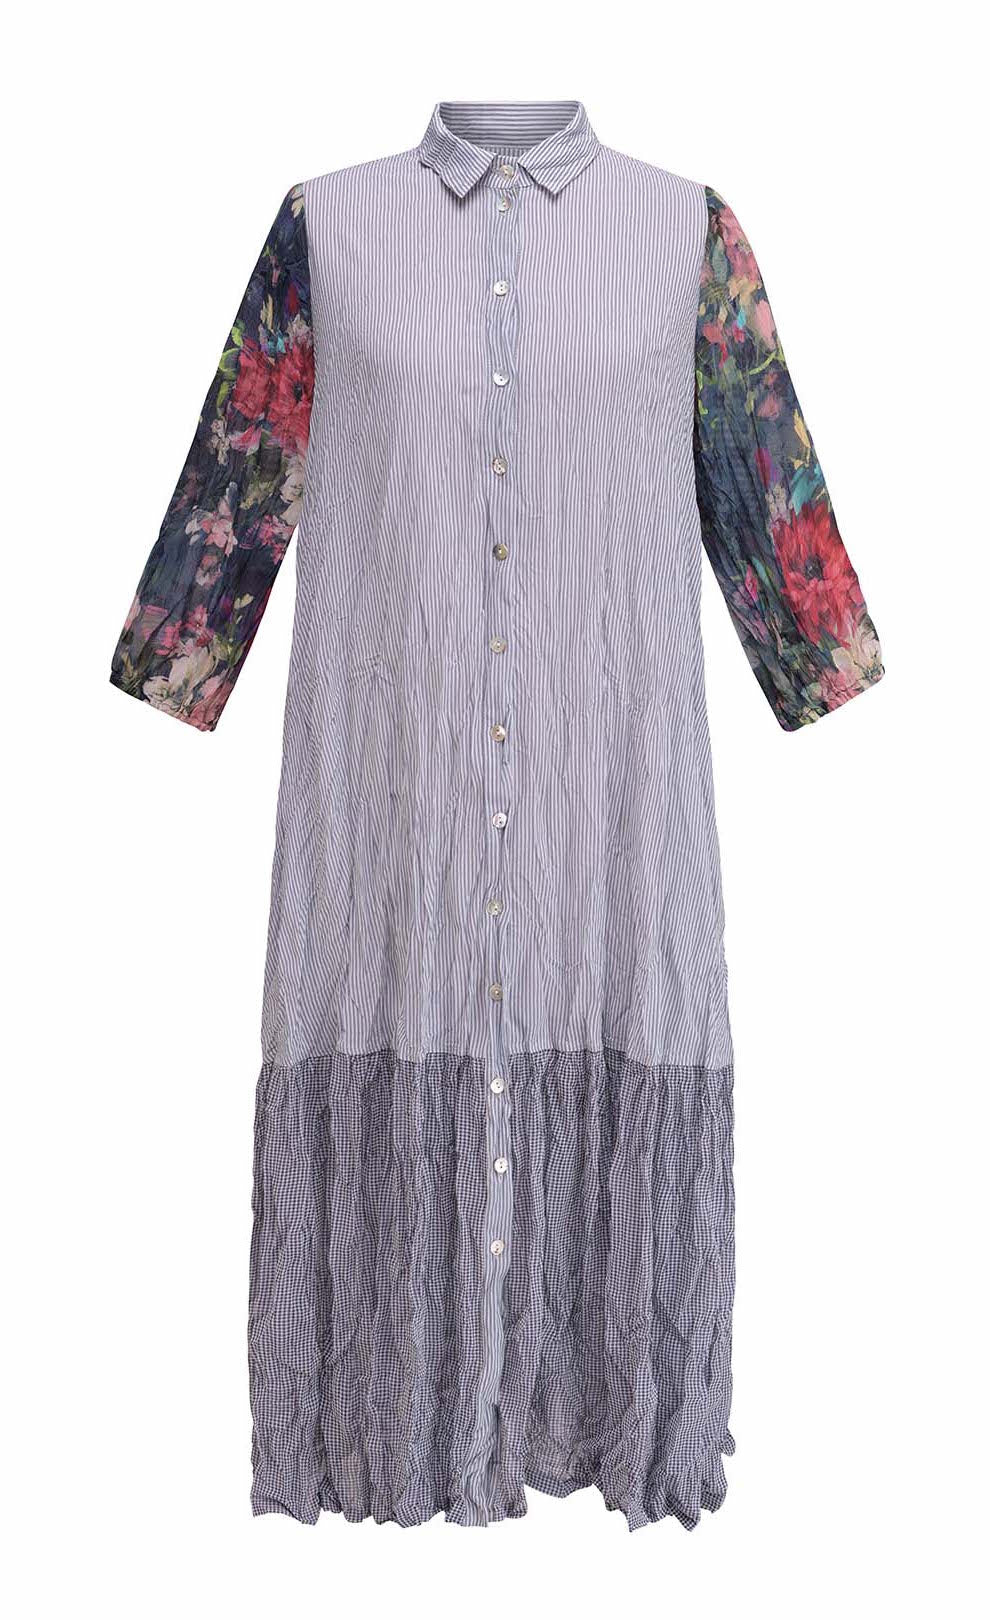 Front view of a woman wearing the alembika flora dress. This dress has navy and white striping, a button down front, and floral 3/4 sleeves. The bottom 1/4 of the dress is more transparent than the top 3/4.